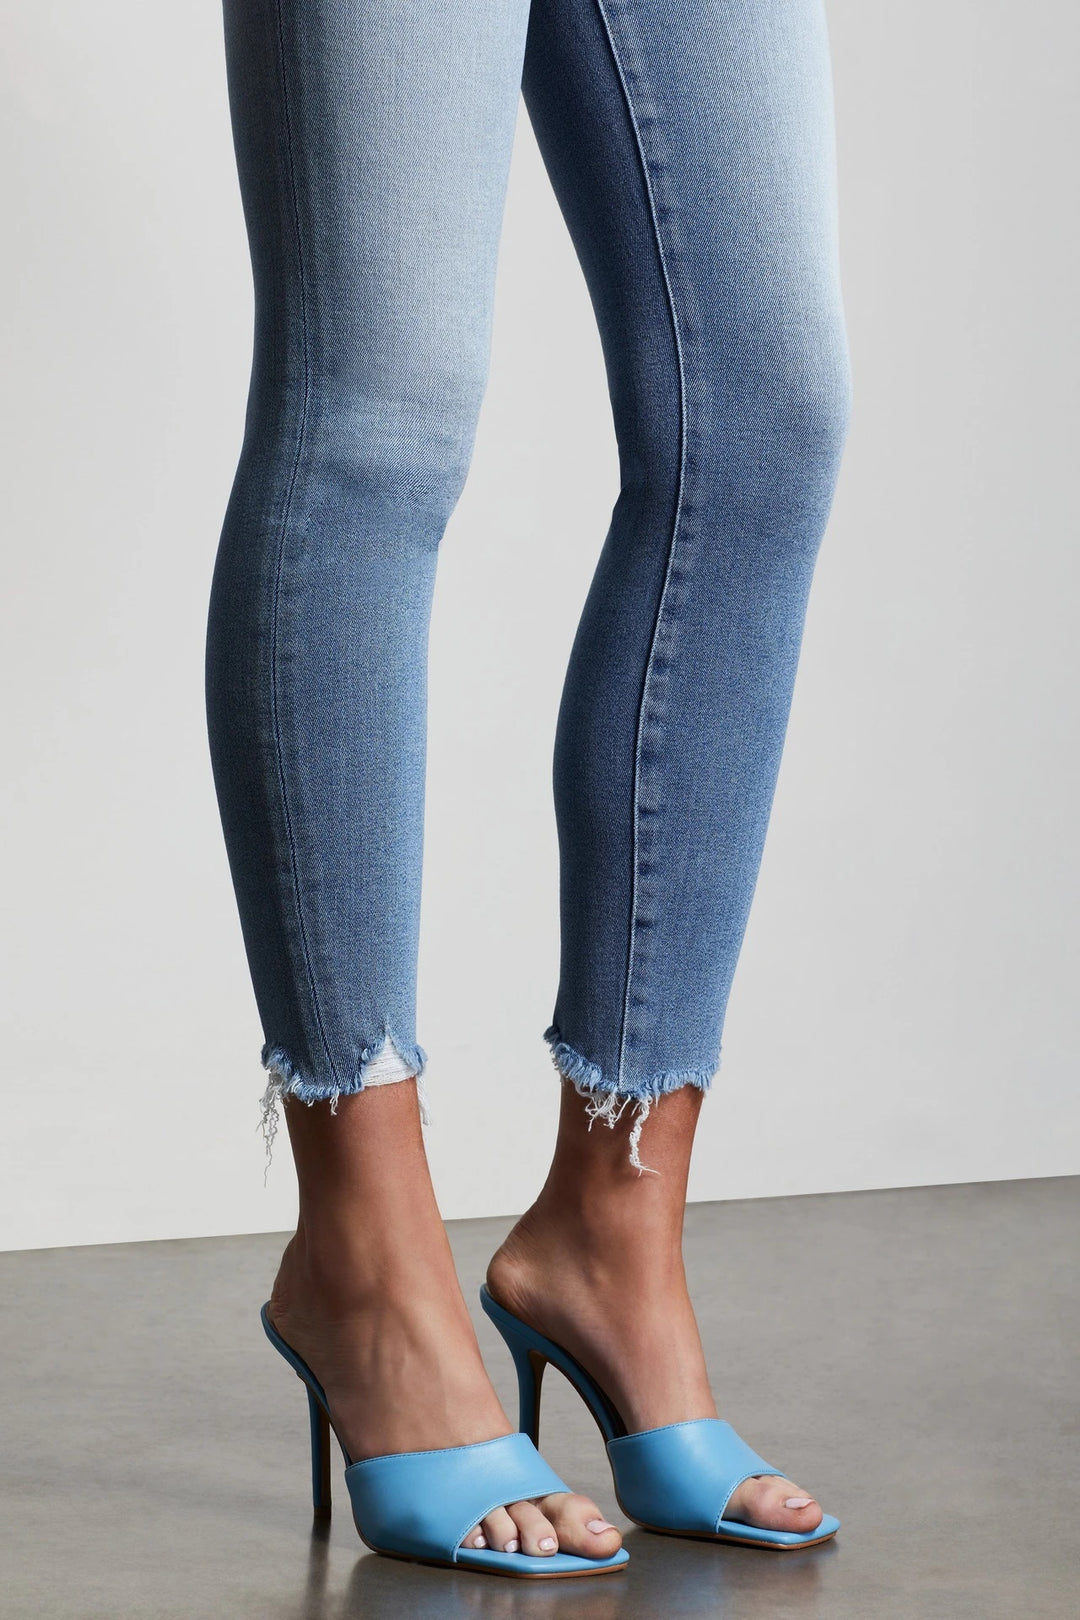 Good American Denim - Good Curves Skinny Crop Jeans with Chew in Blue440